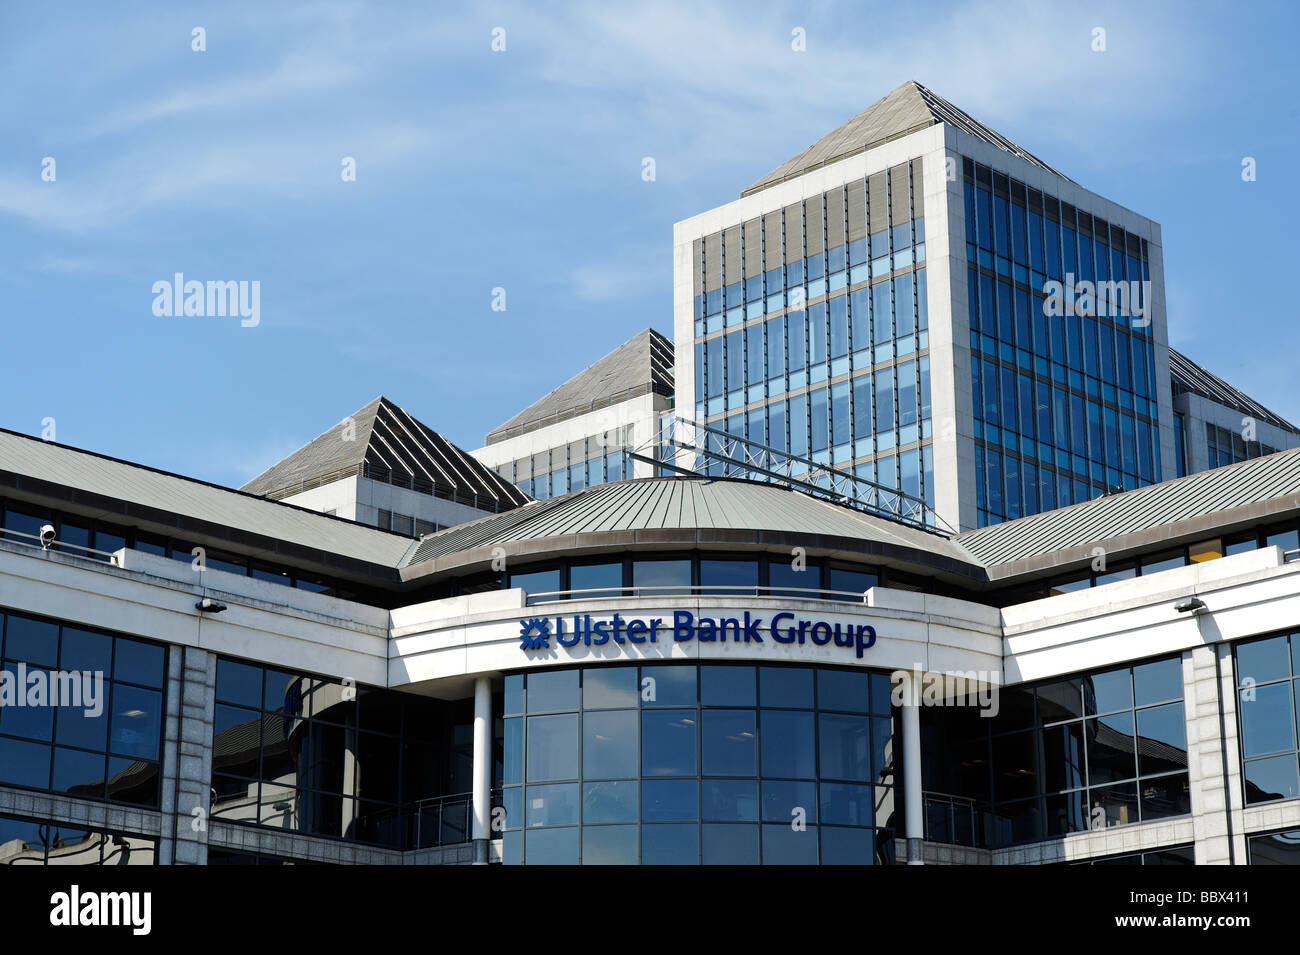 The Ulster Bank Group centre at George s Quay Dublin Republic of Ireland Stock Photo